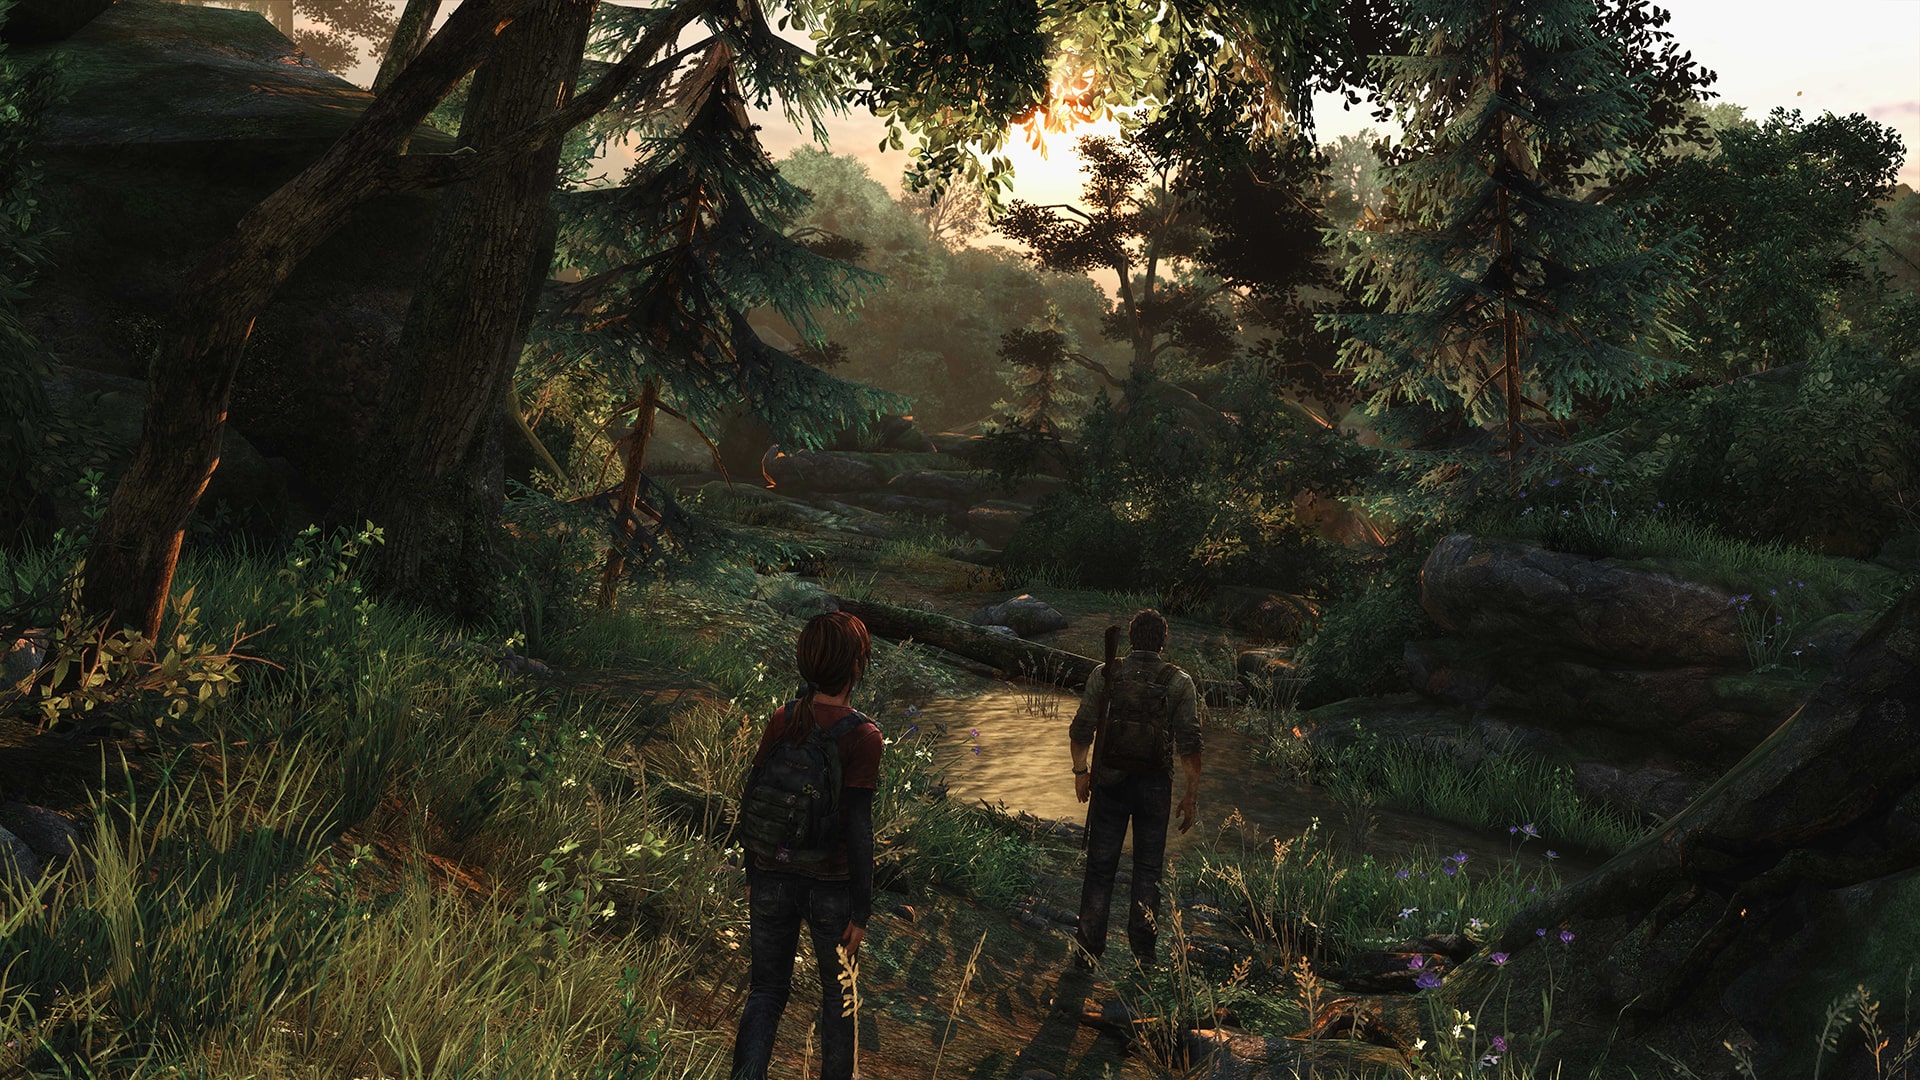 the last of us remastered ps4